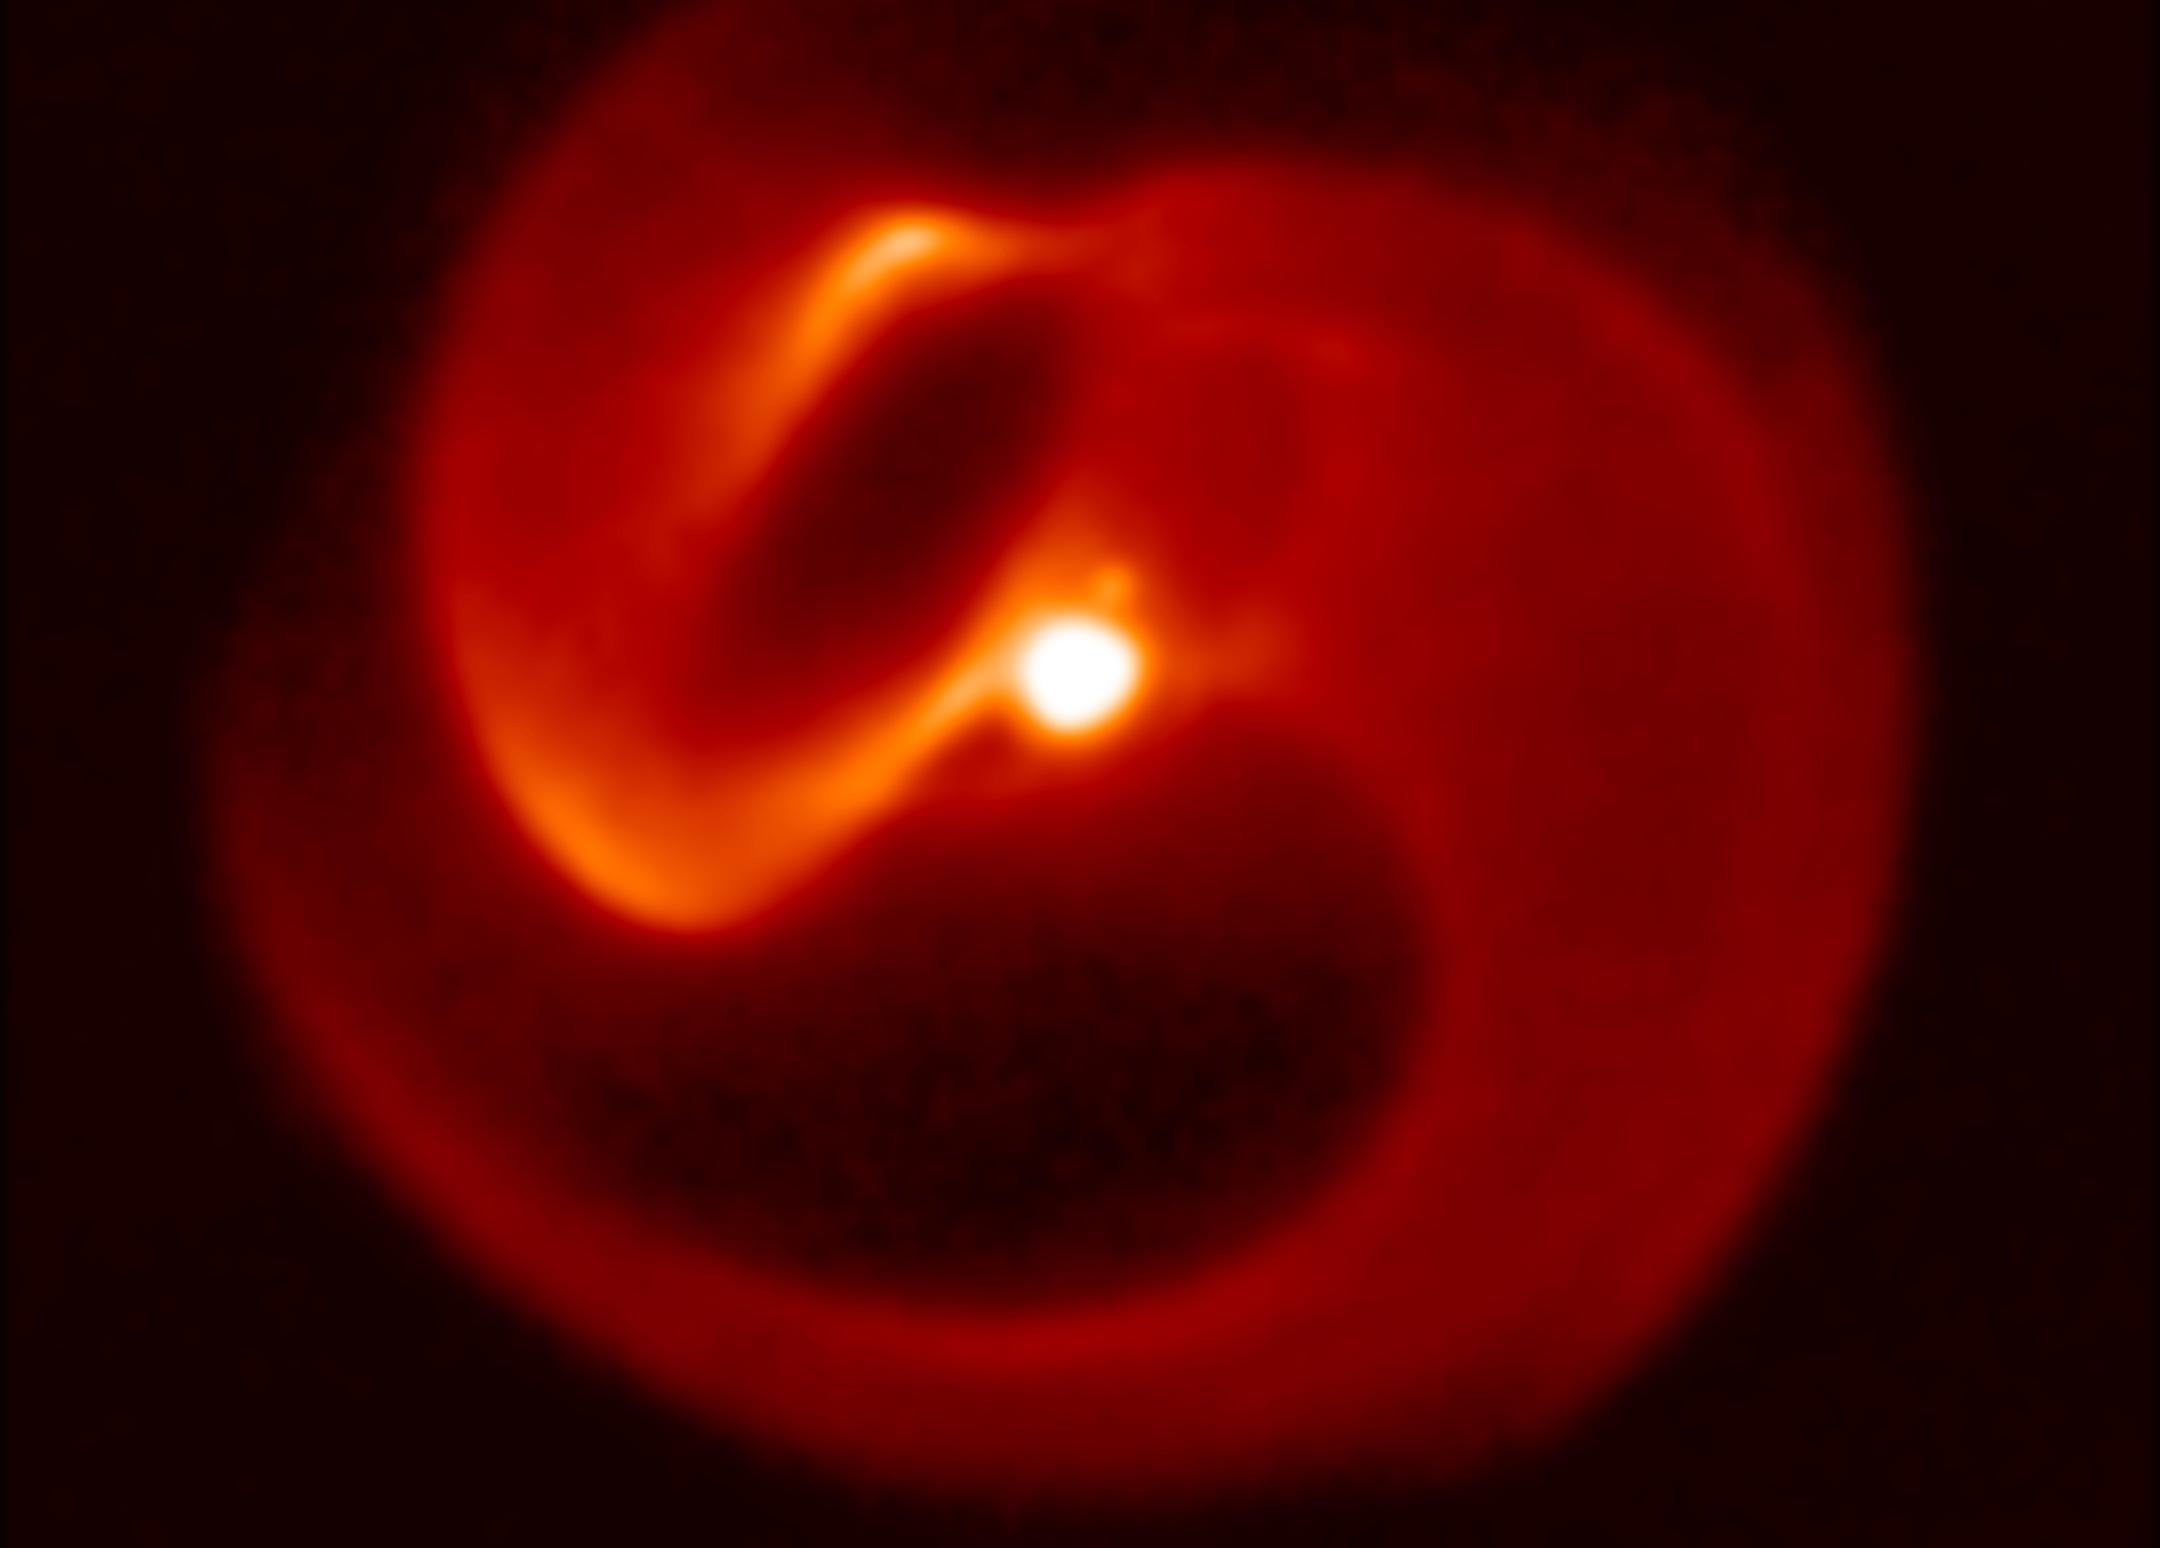 This is an image of Apep captured at 8 microns in the thermal infrared with the VISIR camera on the European Southern Observatory's VLT telescope, Mt Paranal, Chile